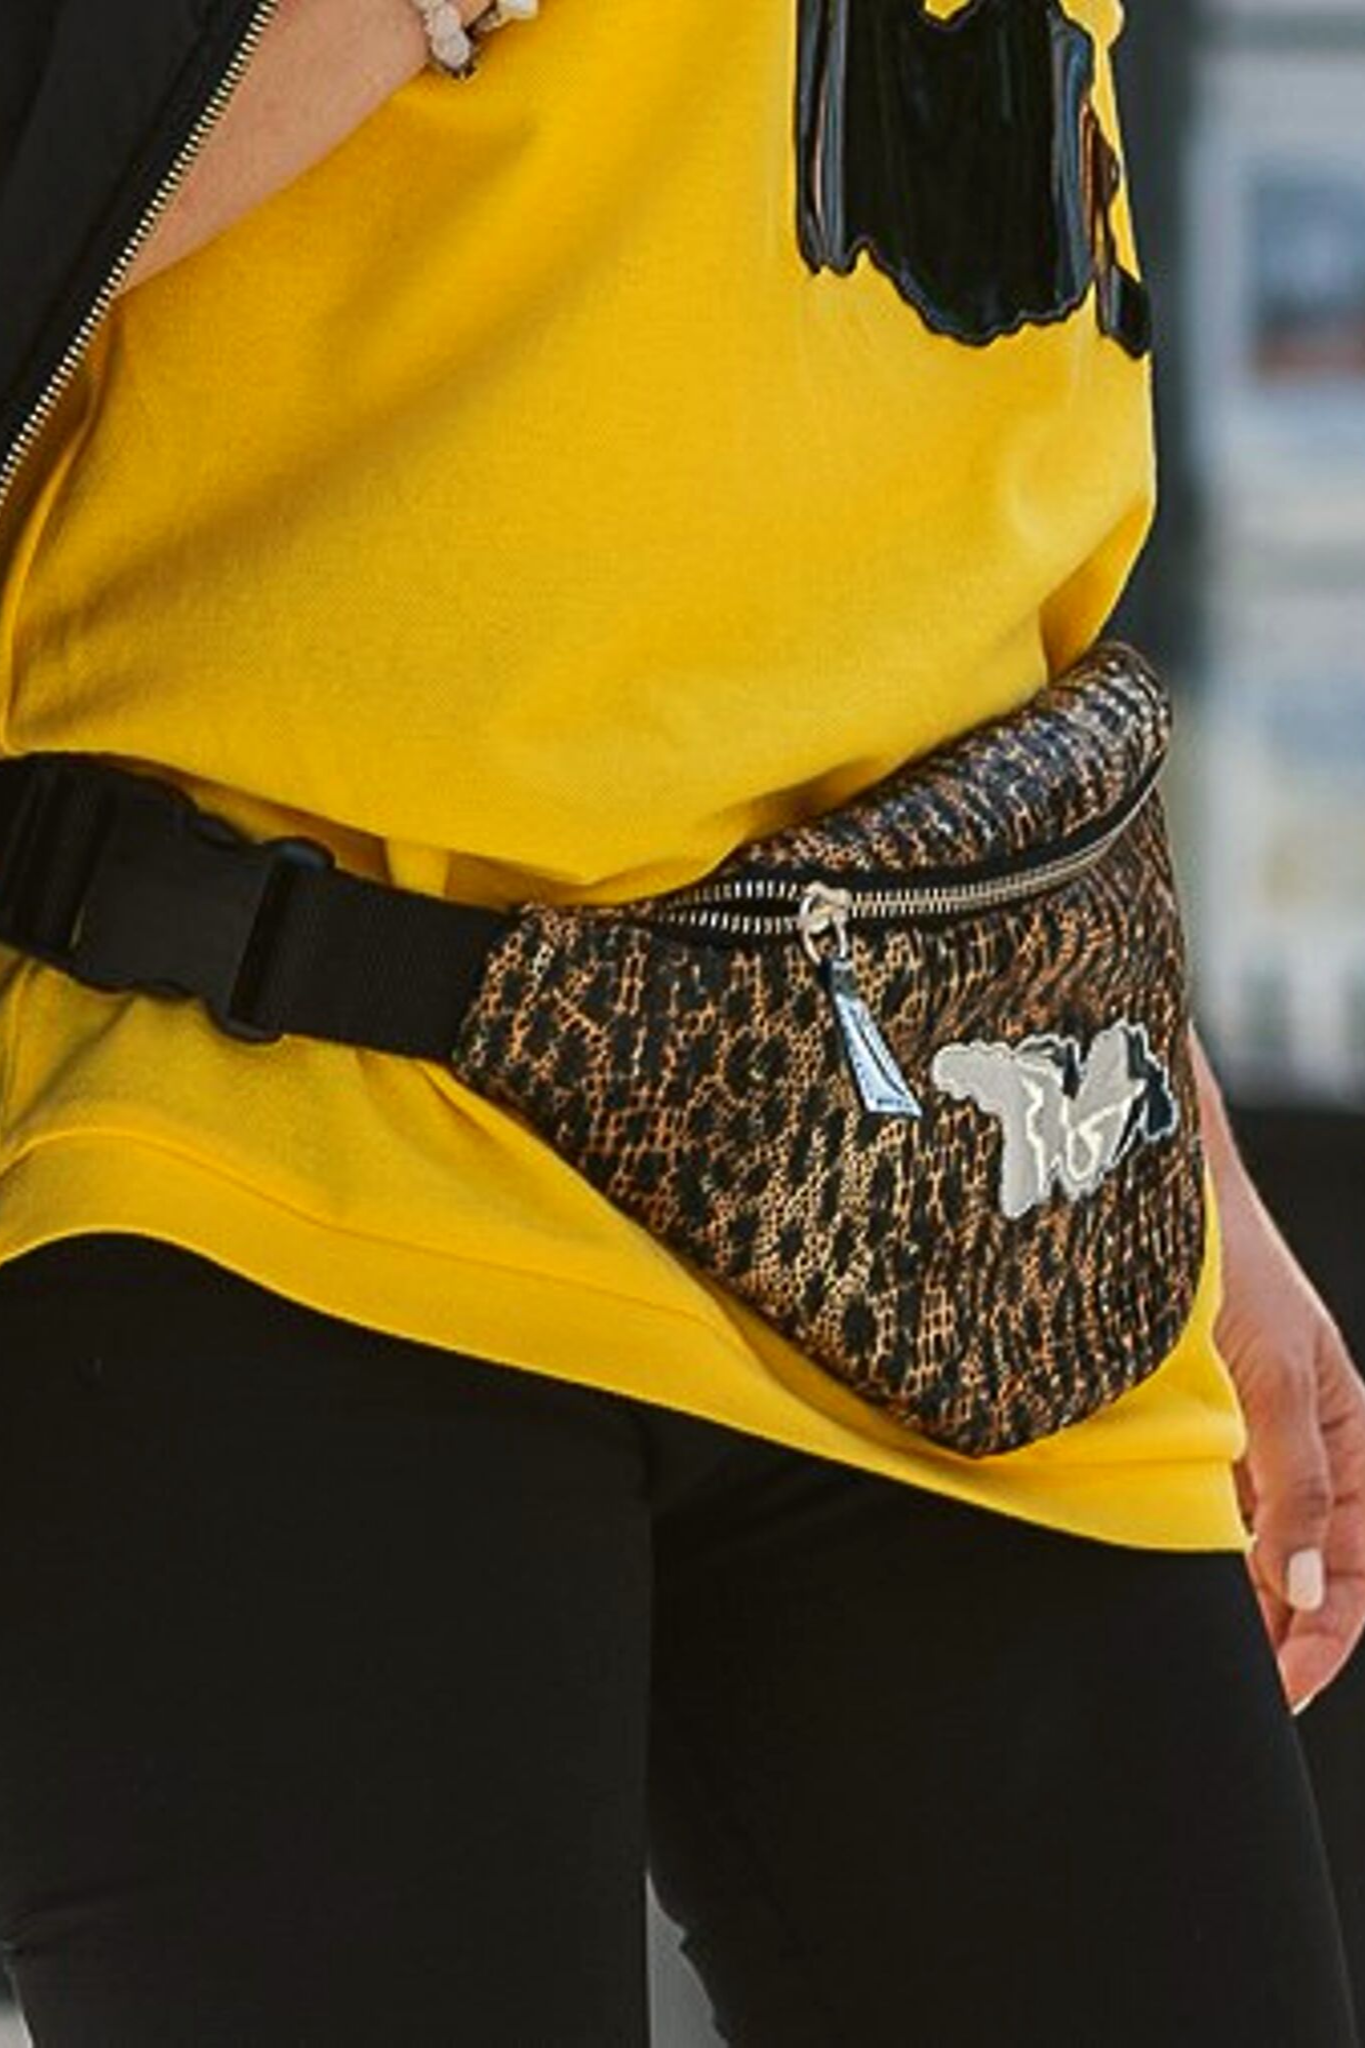 Ninellie Leather fanny pack